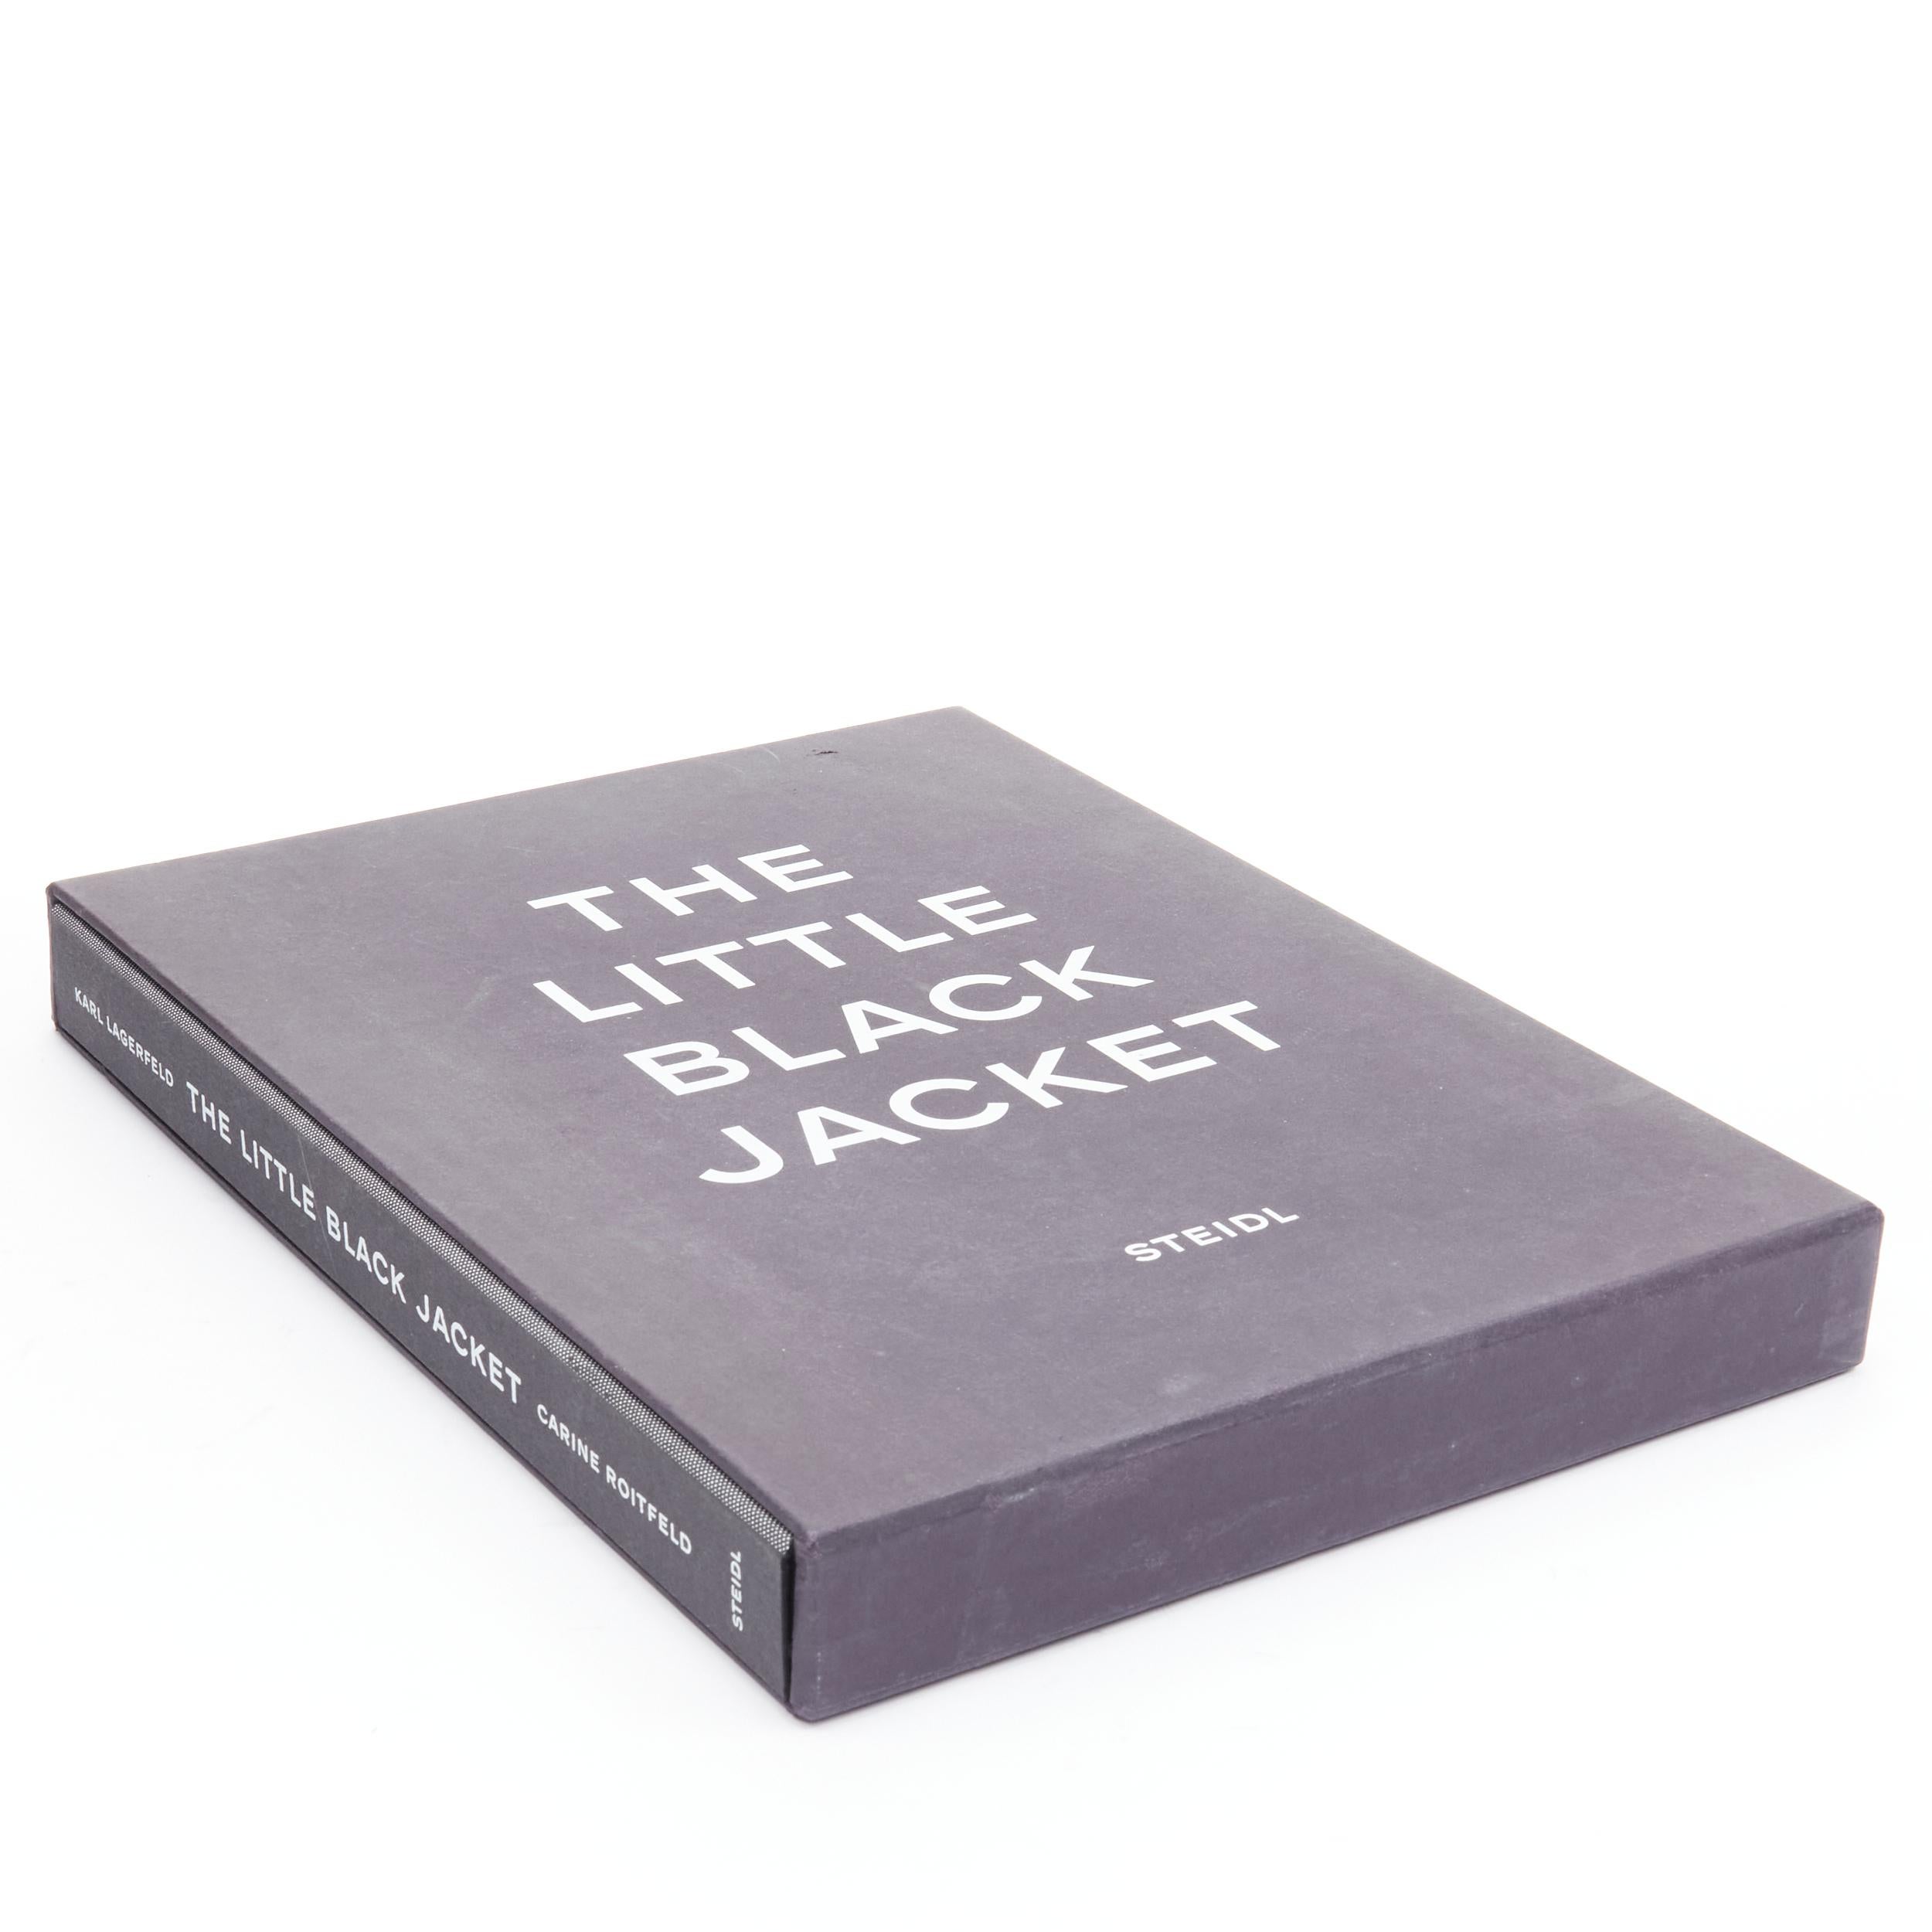 CHANEL The Little Black Jacket Karl Lagerfeld Carine Roitfeld Hard case book 
Reference: TGAS/B00156 
Brand: Chanel 
Material: Paper 
Color: Black 
Extra Detail: This book is Karl Lagerfeld and Carine Roitfeld's reinterpretation of Chanel's iconic